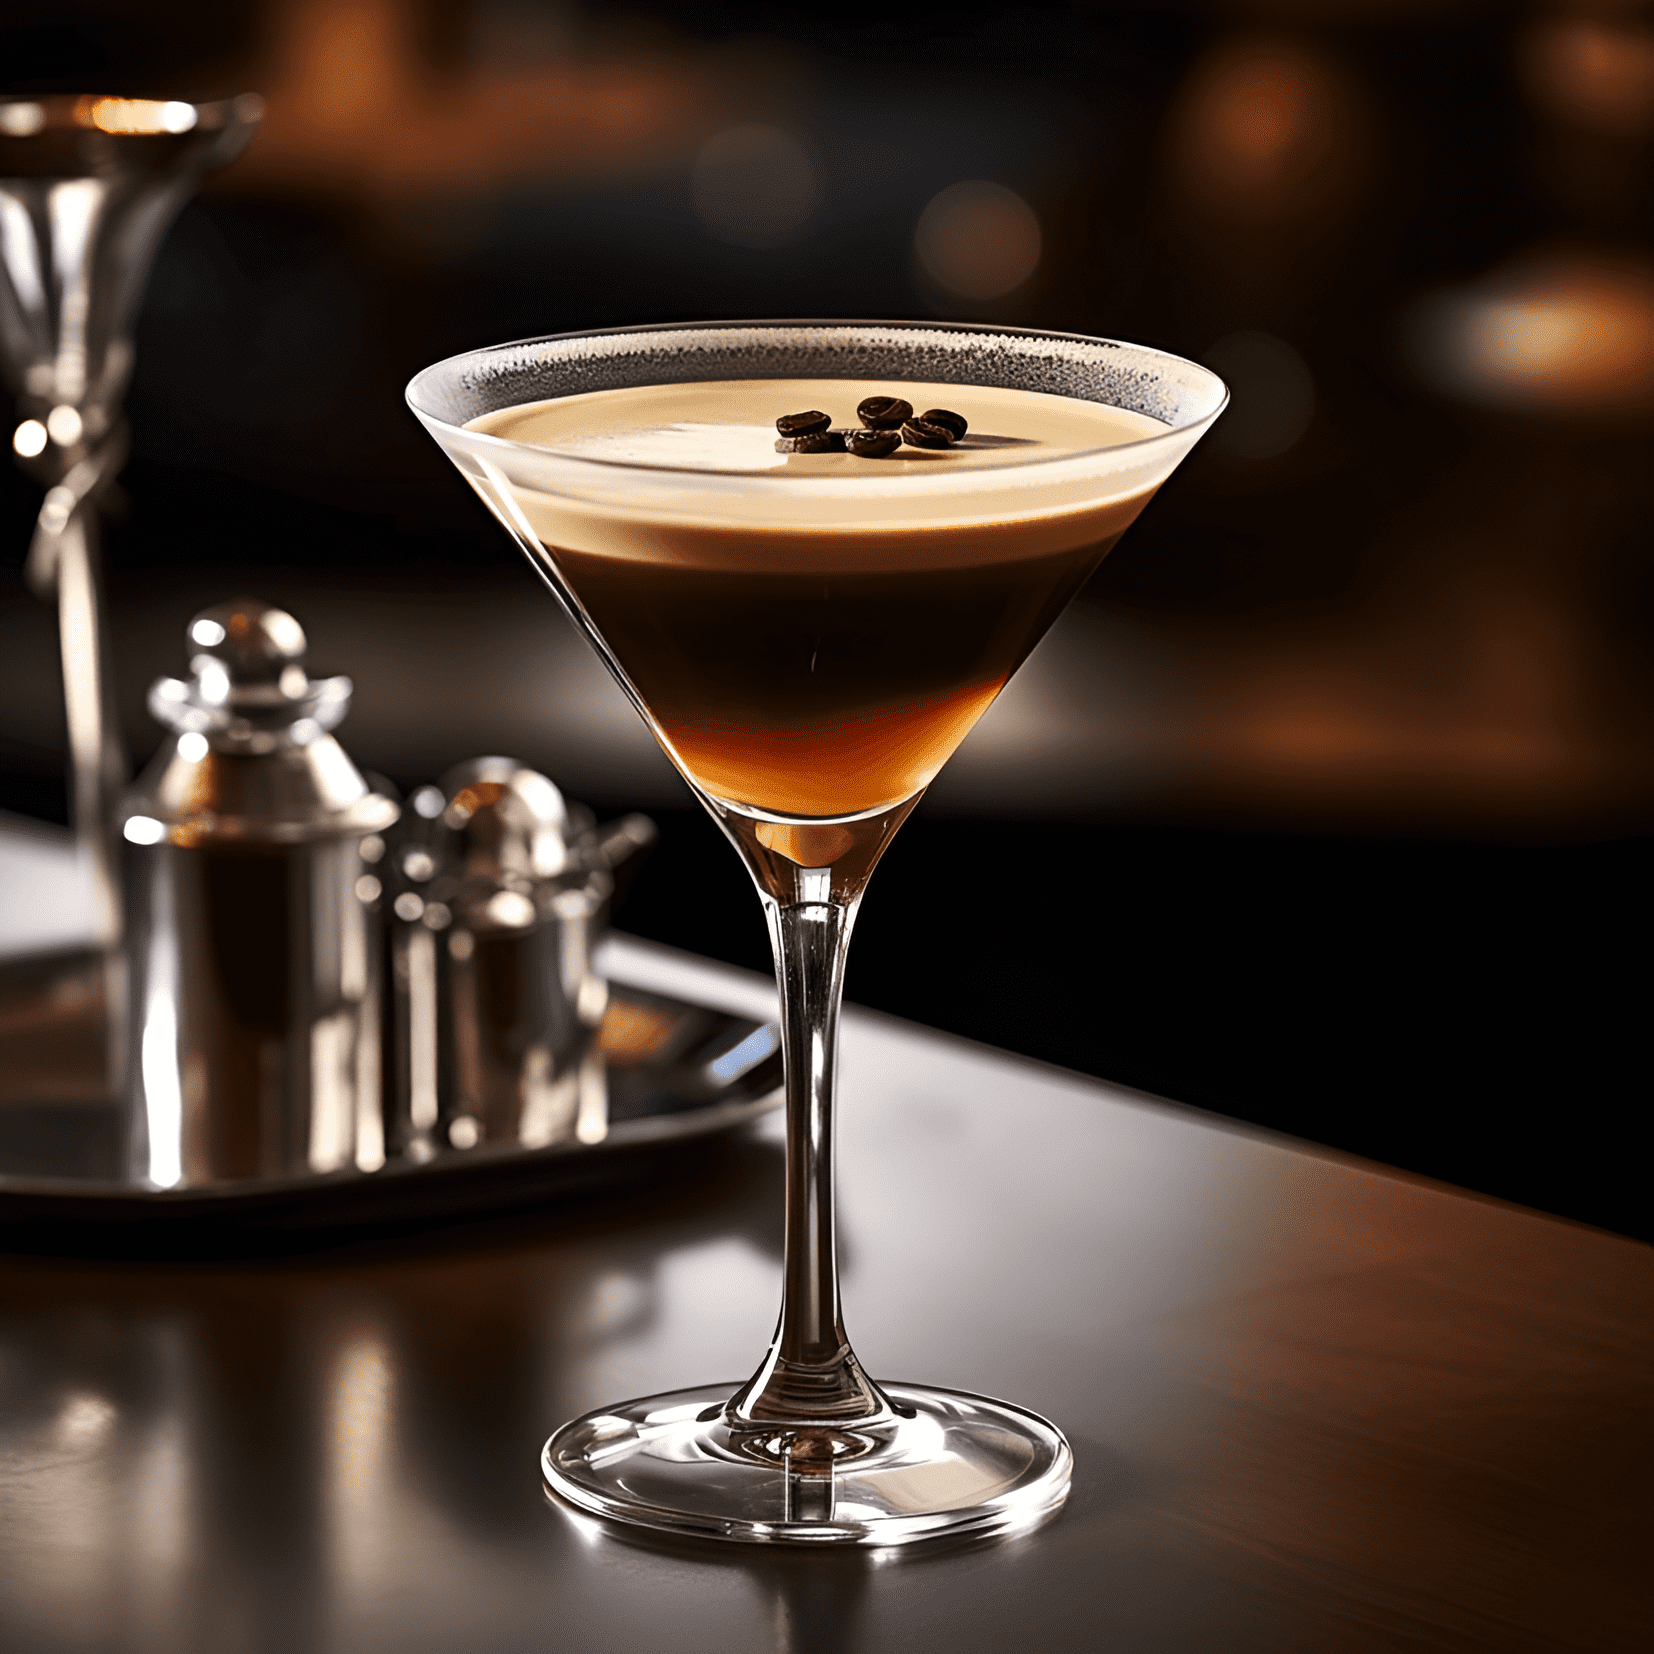 Coffee Cocktail Recipe - The Coffee Cocktail has a rich, velvety texture with a subtle sweetness and a hint of fruity notes from the port wine. The cognac adds warmth and depth to the flavor, while the egg gives it a creamy, frothy consistency.